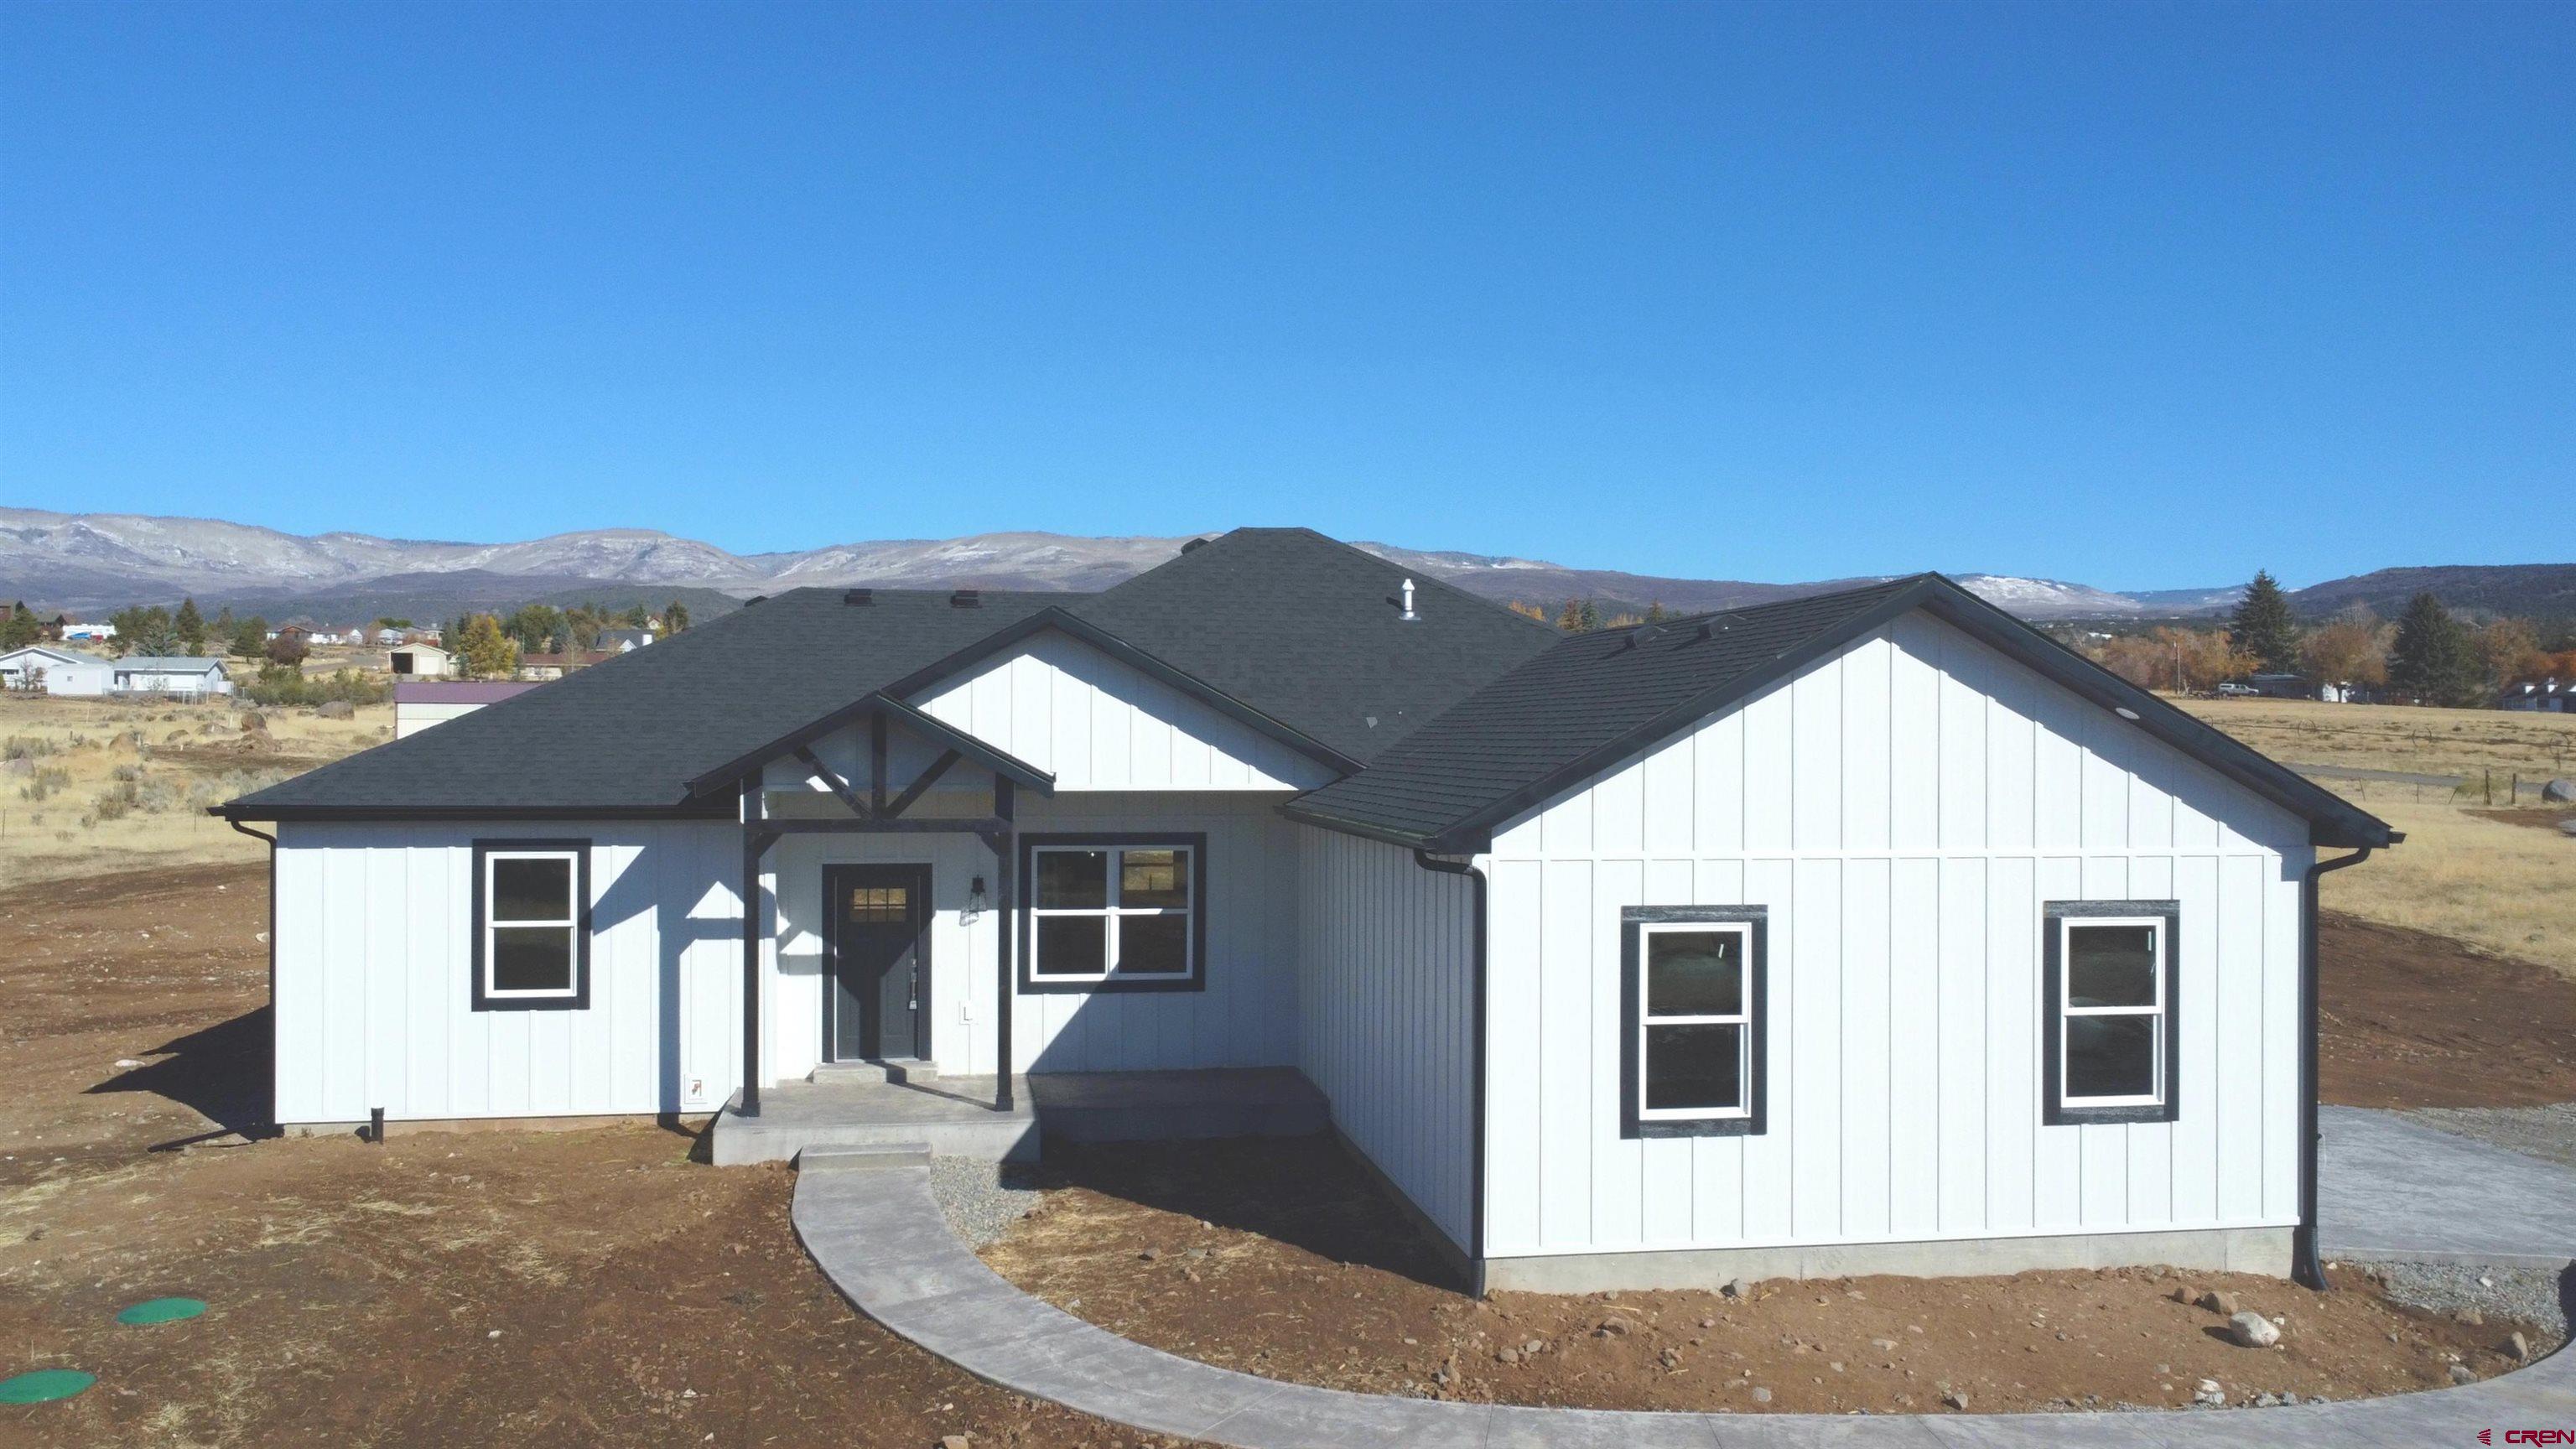 Another New Build from Jim Barnard/TradeMark Construction, LLC.  This 4 bedroom, 2 full bath home will feature 2 master suites.  This Beauty will come with Custom built cabinets and counter tops throughout.  The Kitchen, Living Area and the Dining Area has an open concept, making it easy to spend time with the family. Located North of Cedaredge on 1.8 Acres, giving you some elbow room and fantastic views.  The Cedaredge area offers many recreational activities like ATV riding, hiking, biking, lake fishing, cross country skiing, the Cedaredge Golf Course and down hill skiing at Powderhorn Ski Resort.  Small Town life, but just minutes away from the Magnificent Grand Mesa!